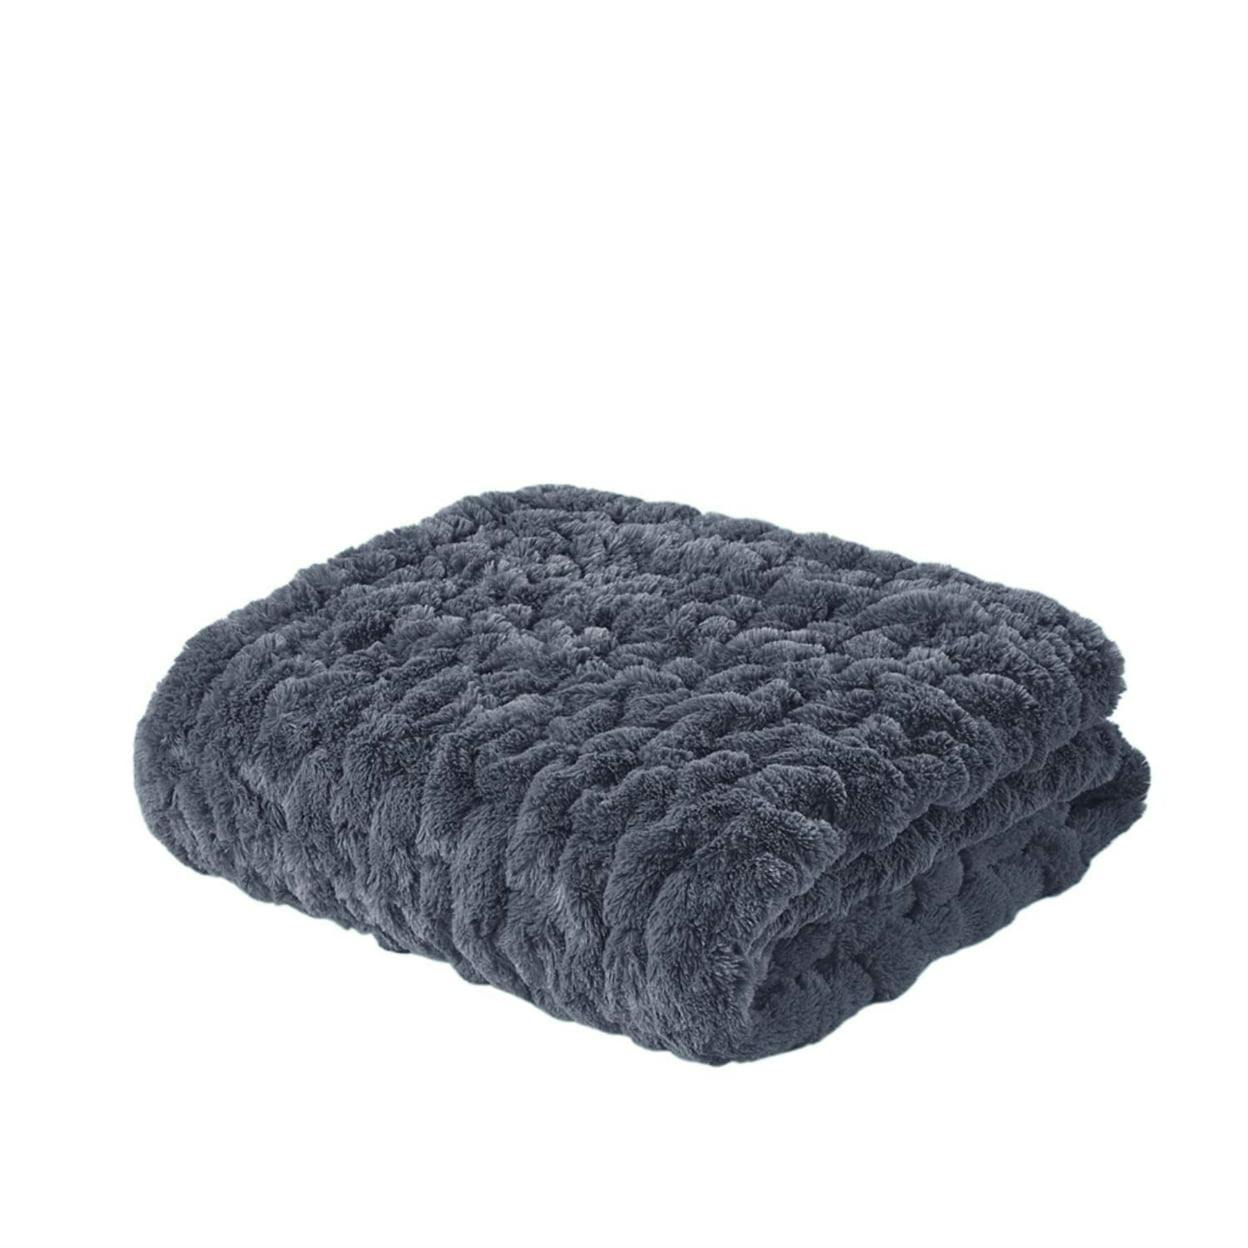 Slate Blue Ruched Faux Fur & Mink Reversible Throw, 50"x60"